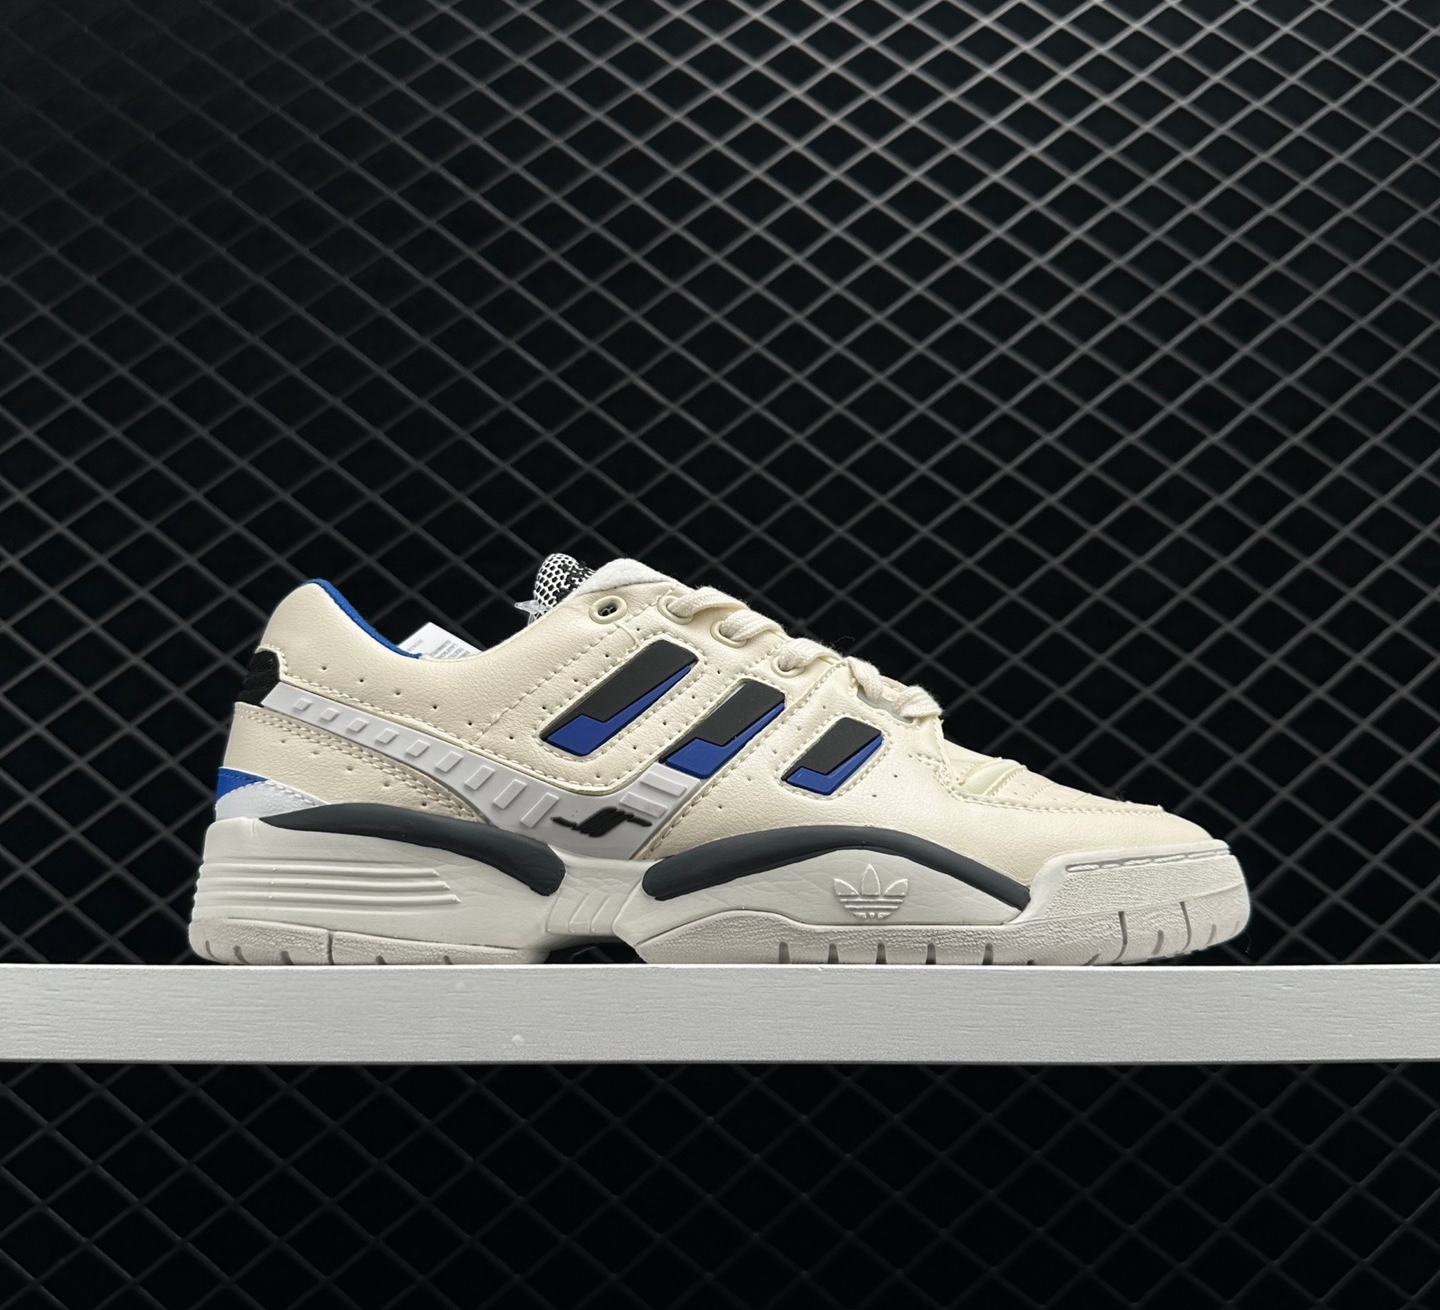 Adidas Originals TORSION COMP White Blue EE7377 - Stylish and Comfortable Sneakers